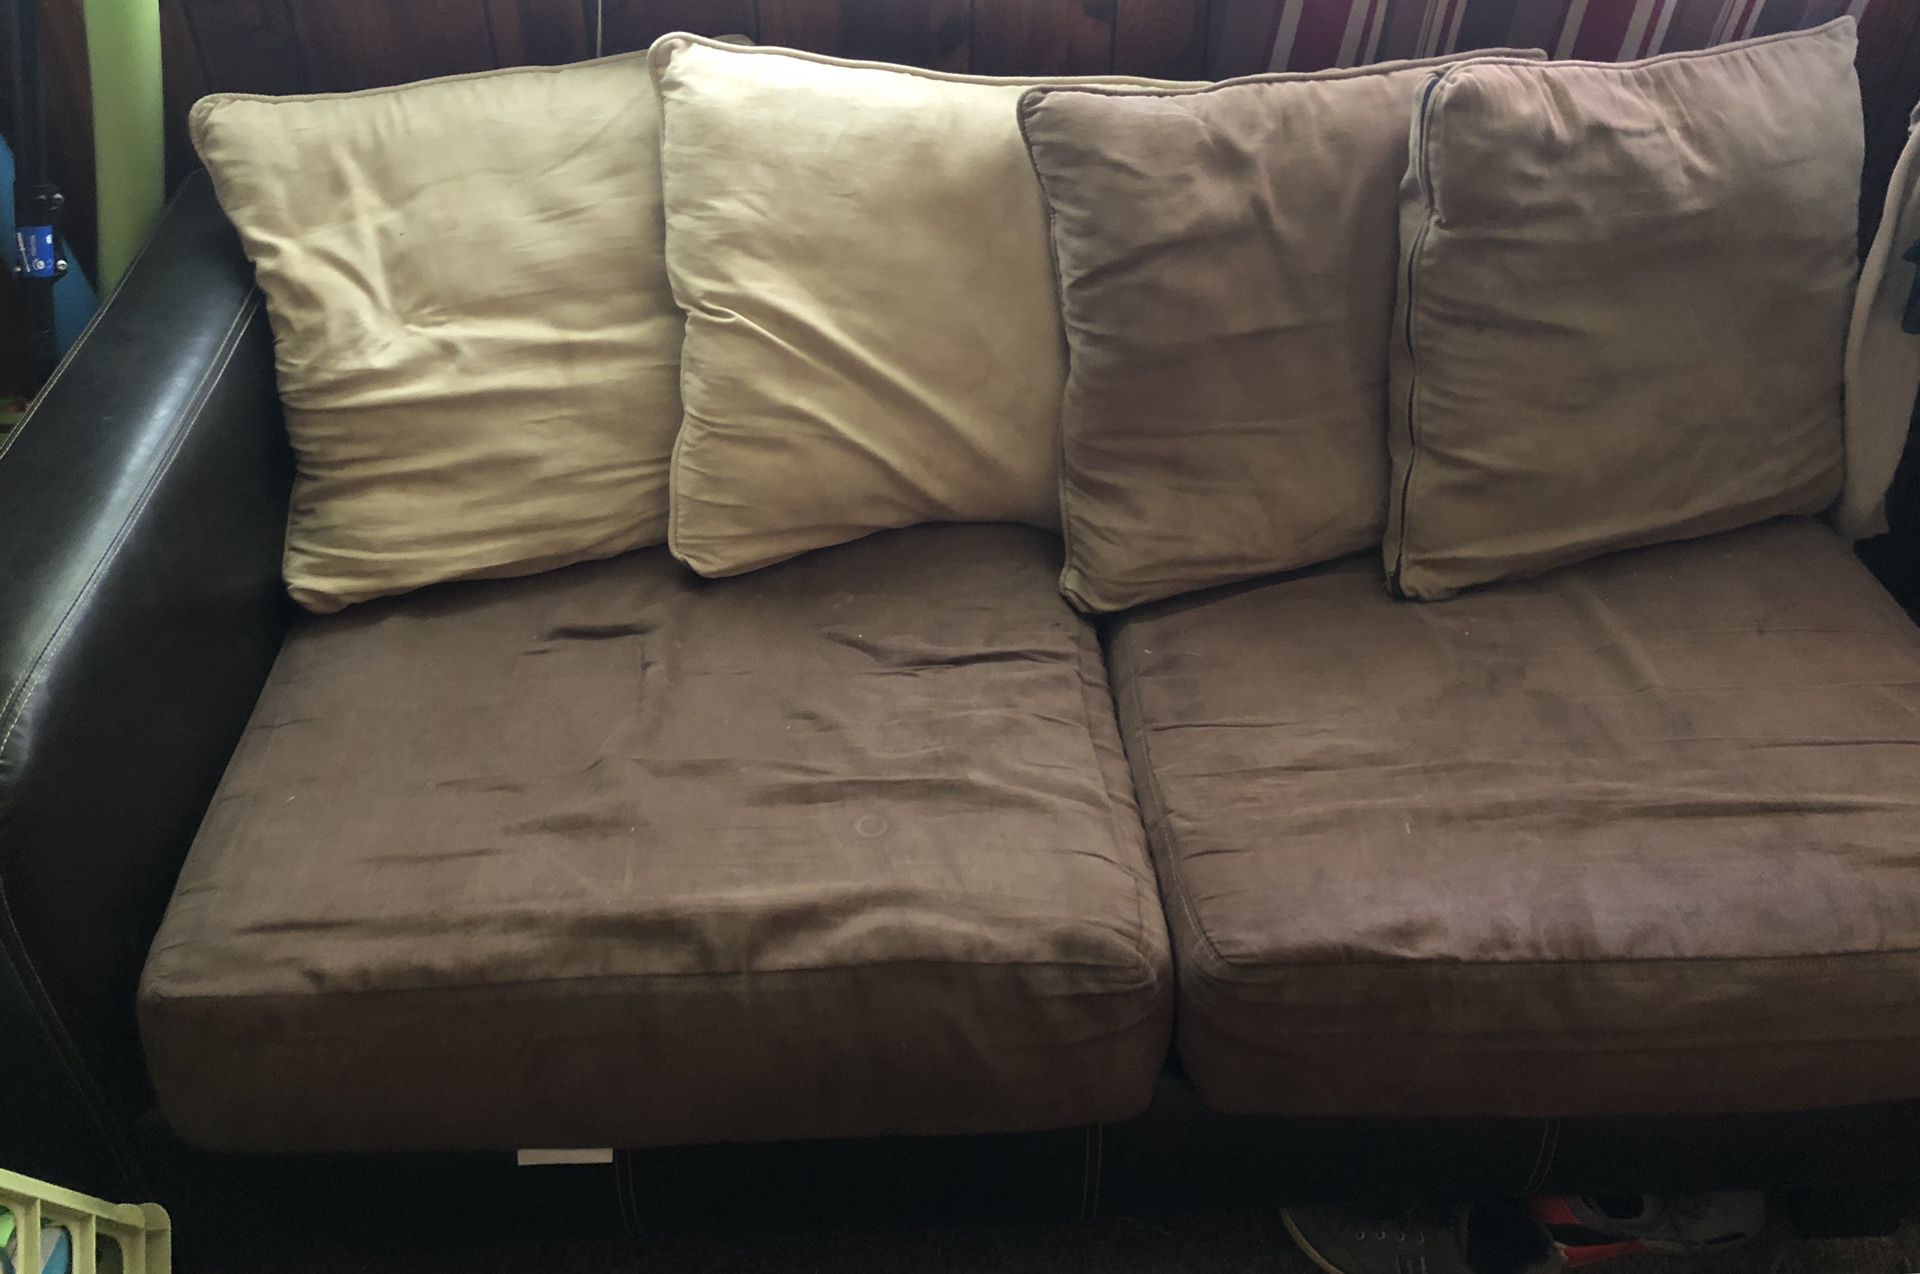 Part of a sectional couch